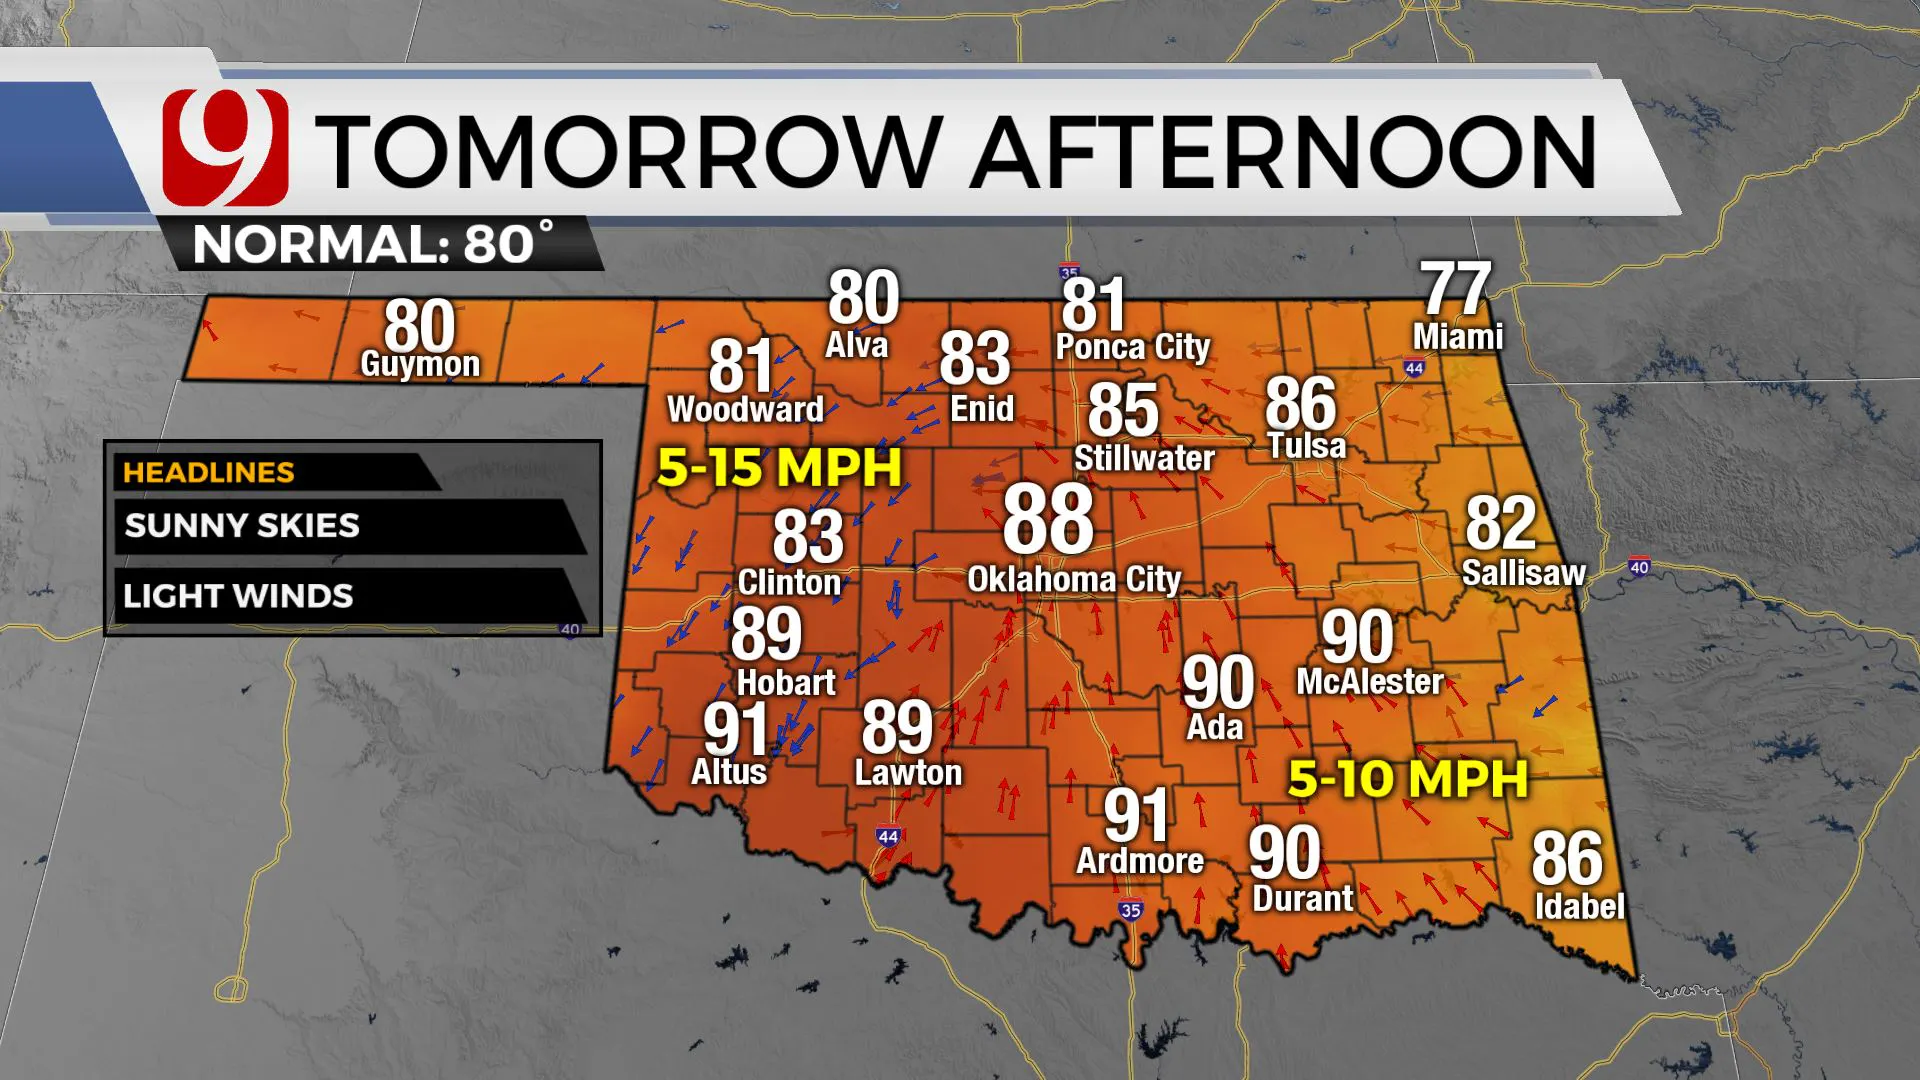 Temps tomorrow afternoon.